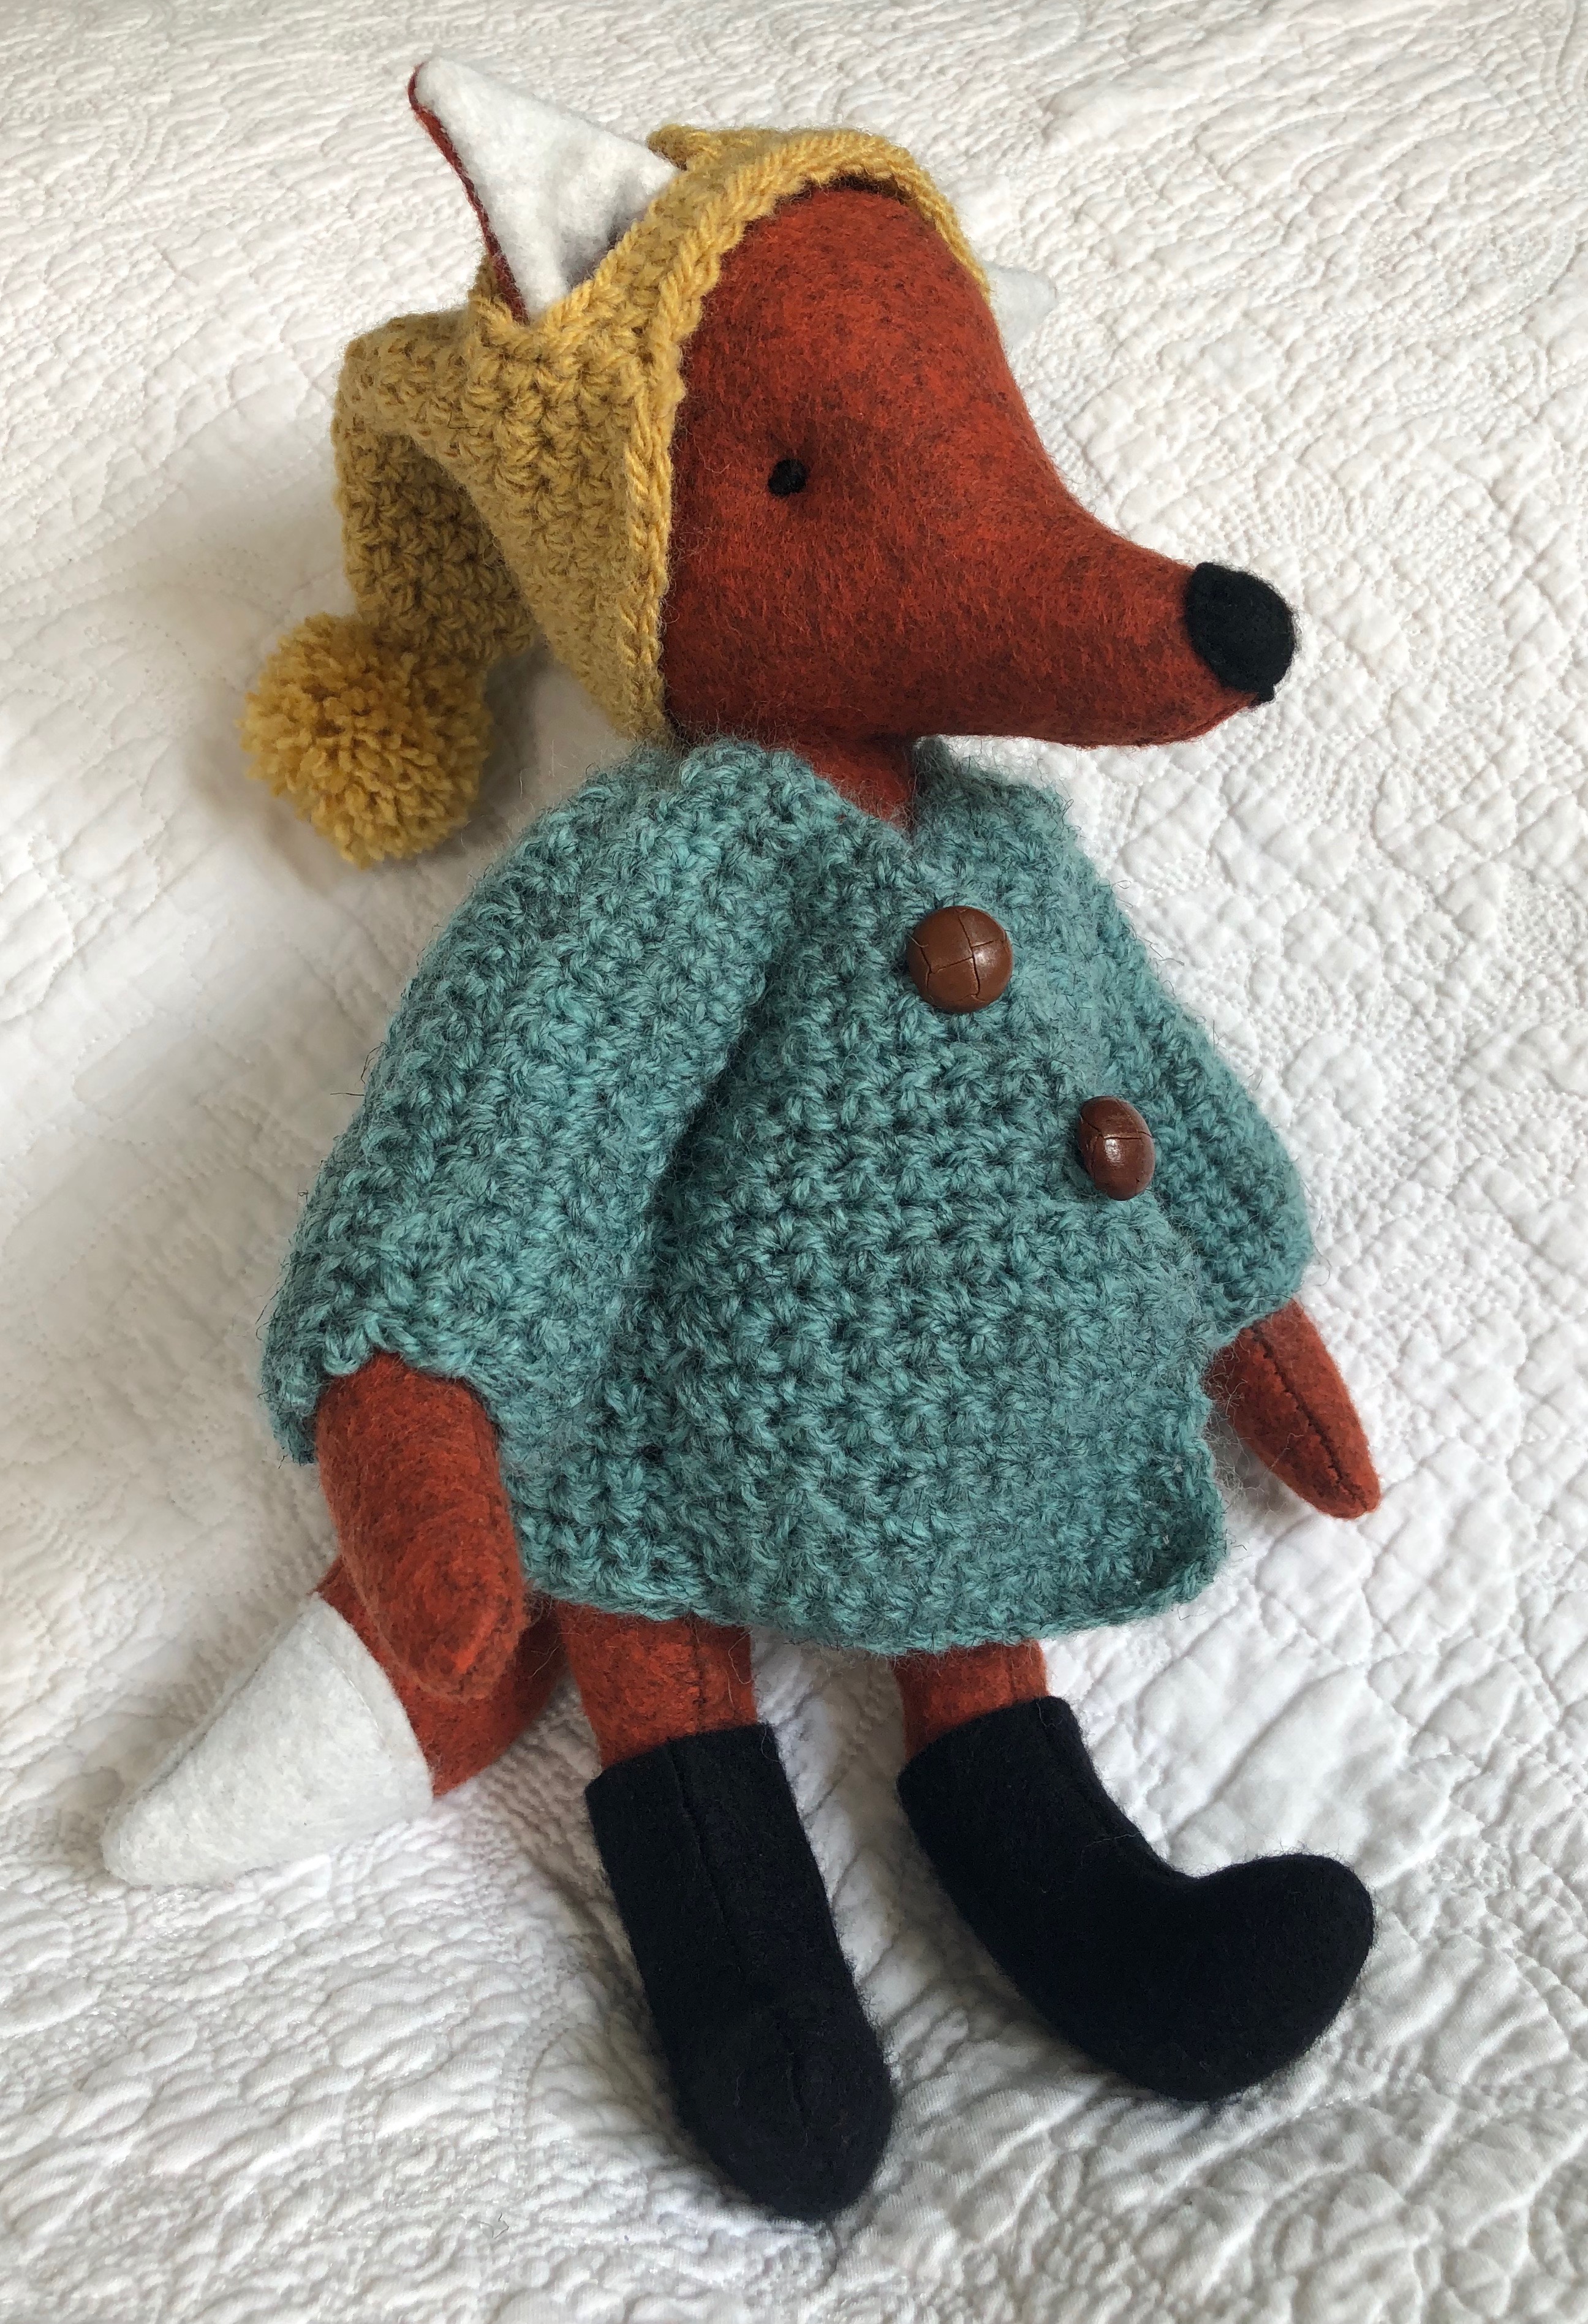 A handmade rusty brown felt fox with a green hand crocheted jacket, mustard yellow bobble hated little black felt boots. Fox pattern by Simone Gooding, crocheted clothes designed and made by me.